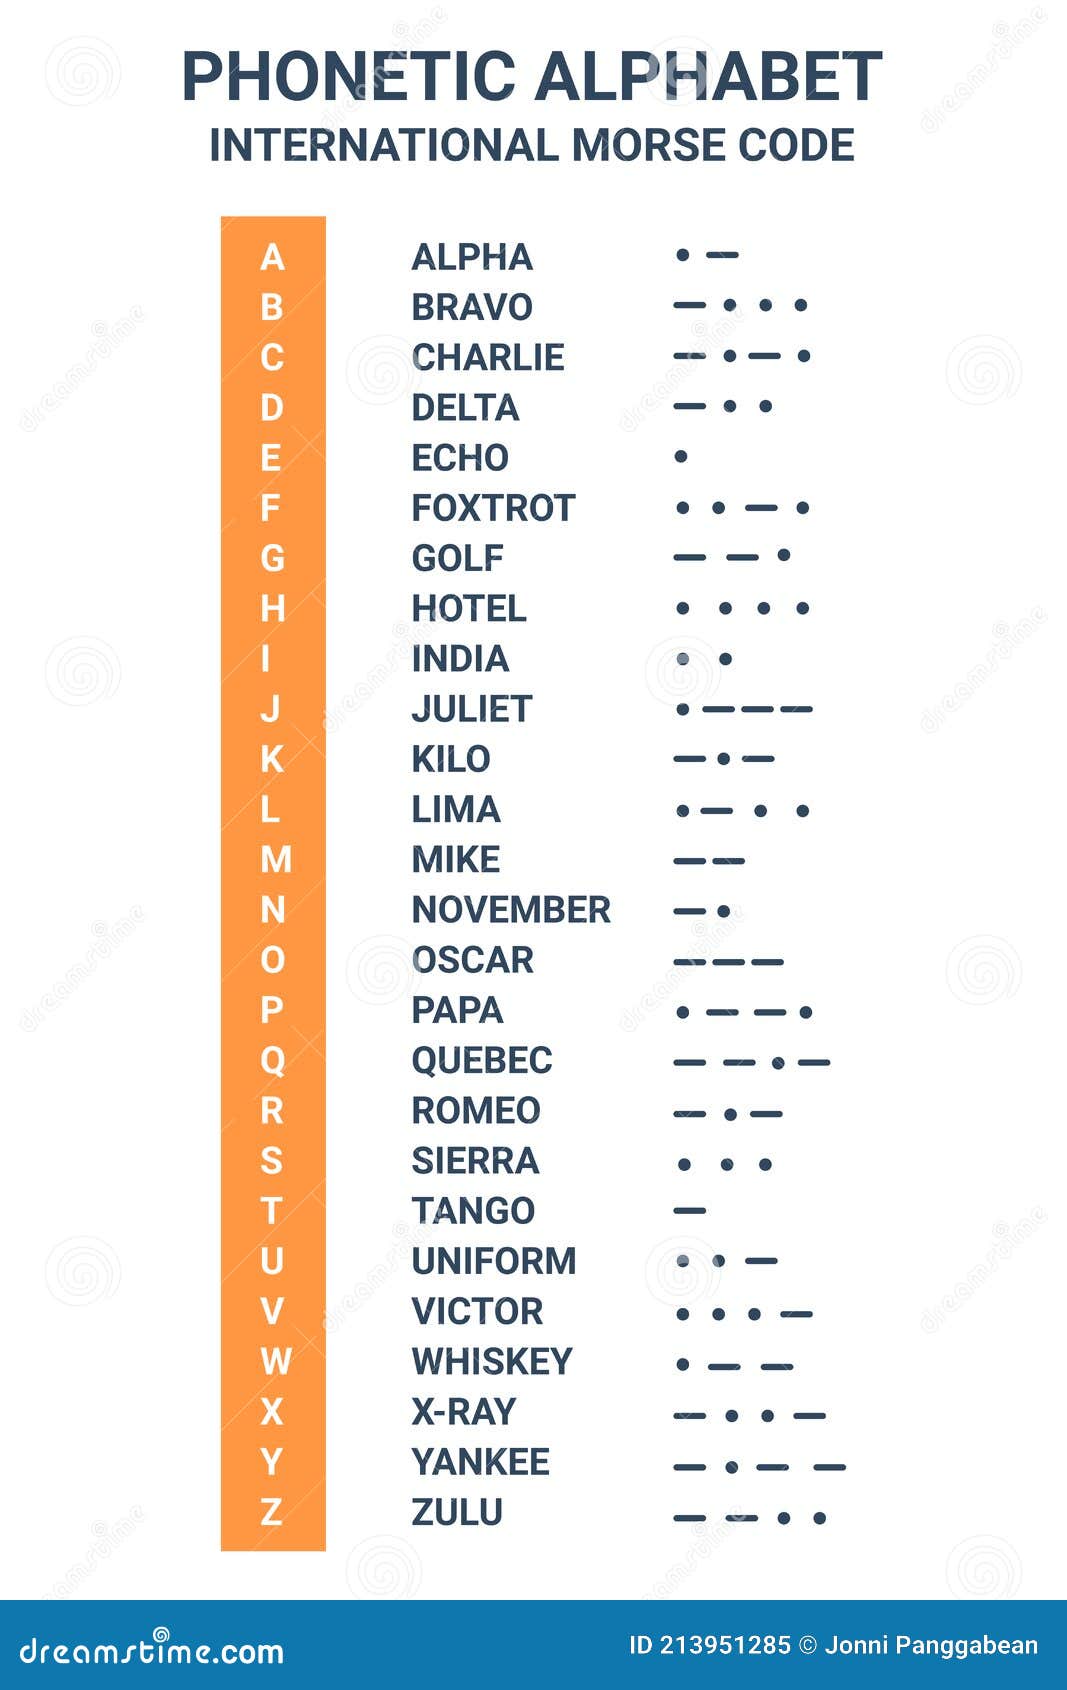 Phonetic Alphabet And International Morse Code Suitable Used For Maritime And Aviation